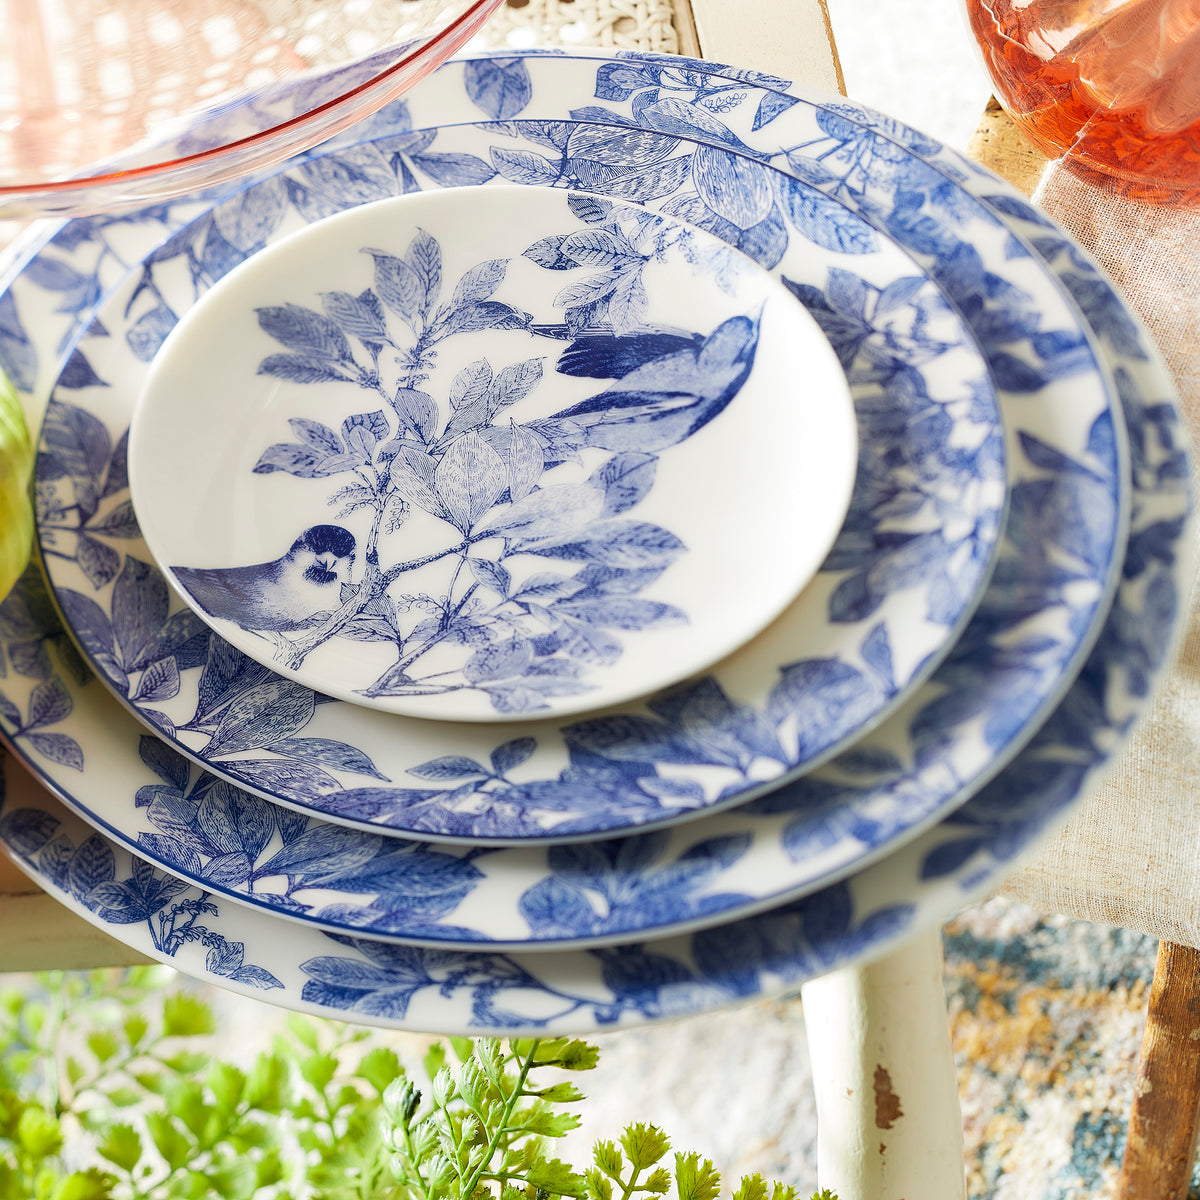 A set of Arbor Blue Rimmed Dinner Plates with hand-drawn detail by Caskata Artisanal Home on a table.